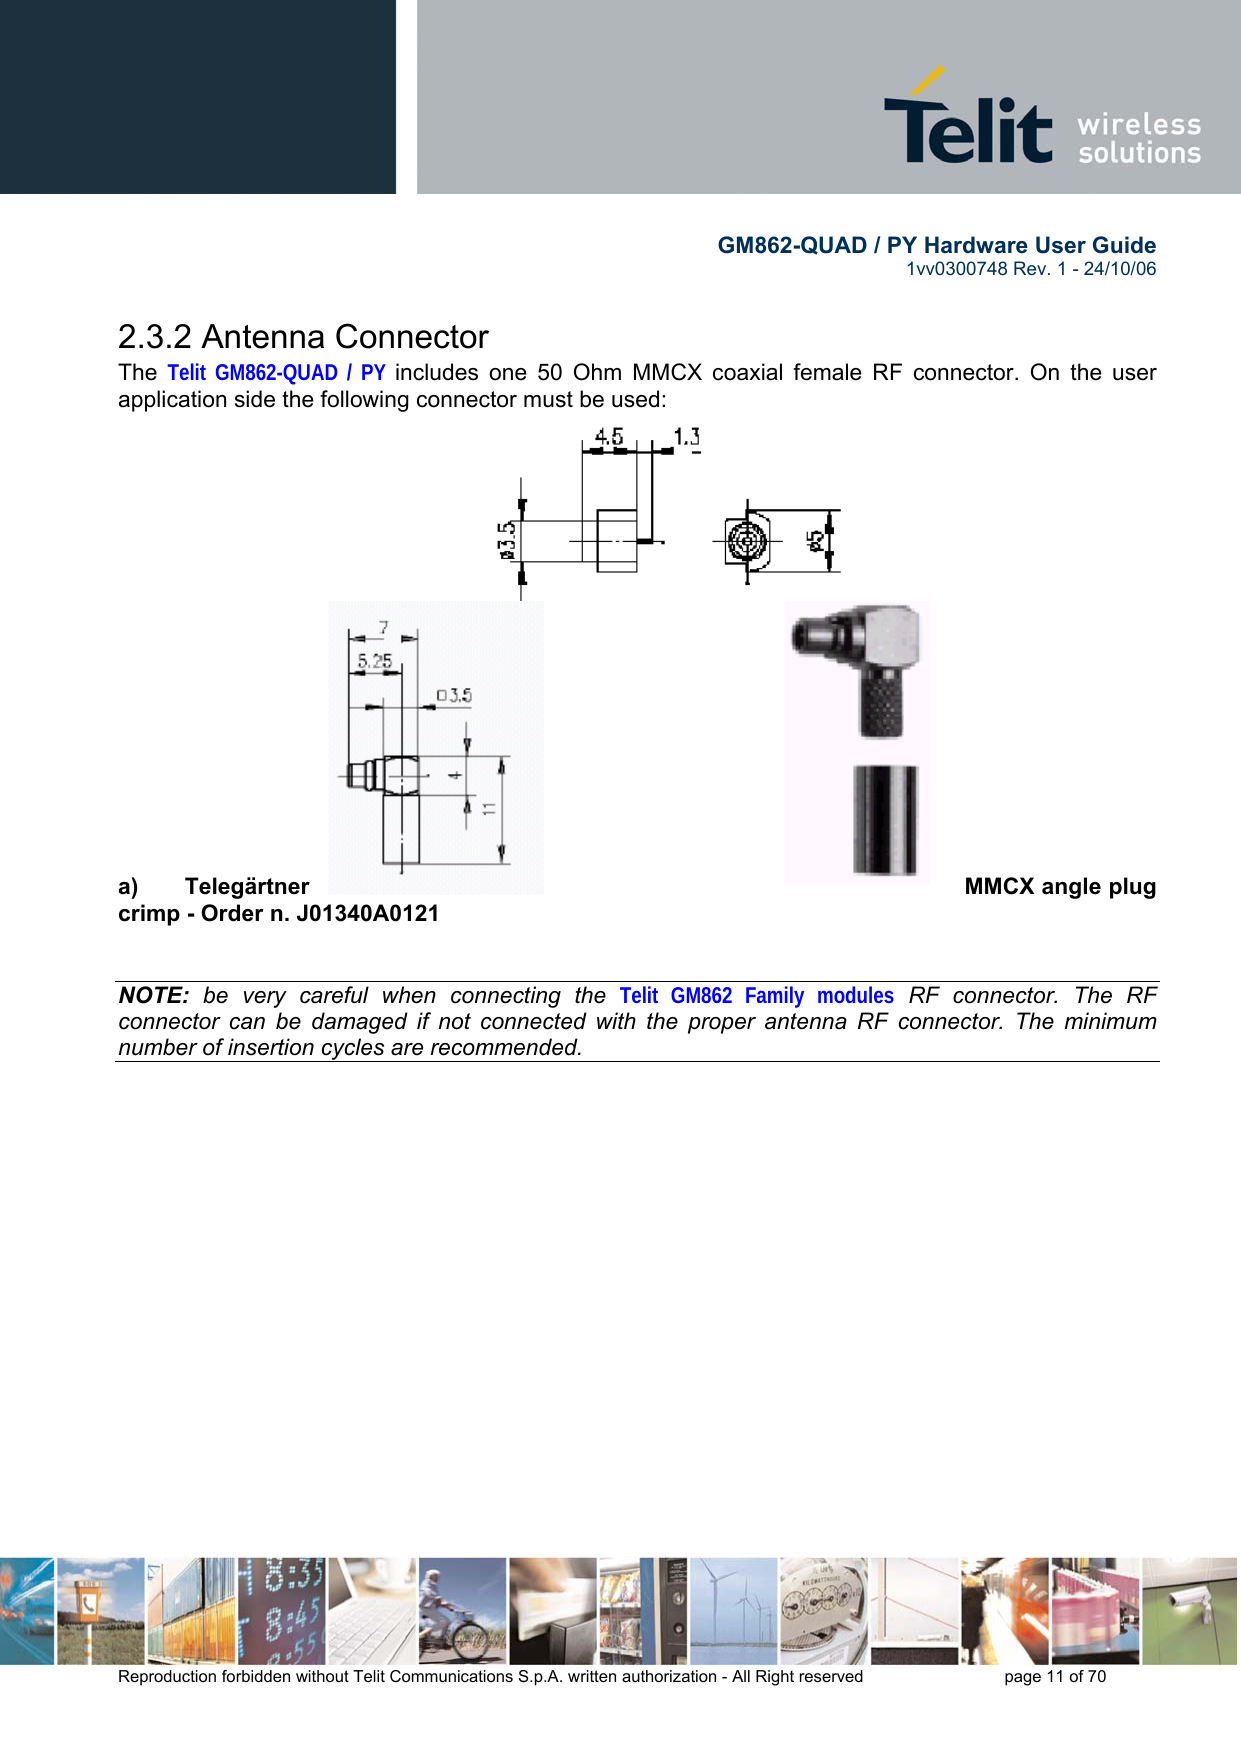        GM862-QUAD / PY Hardware User Guide   1vv0300748 Rev. 1 - 24/10/06    Reproduction forbidden without Telit Communications S.p.A. written authorization - All Right reserved    page 11 of 70  2.3.2 Antenna Connector The  Telit GM862-QUAD / PY includes one 50 Ohm MMCX coaxial female RF connector. On the user application side the following connector must be used:                  a)  Telegärtner  MMCX angle plug crimp - Order n. J01340A0121   NOTE: be very careful when connecting the Telit GM862 Family modules RF connector. The RF connector can be damaged if not connected with the proper antenna RF connector. The minimum number of insertion cycles are recommended.  